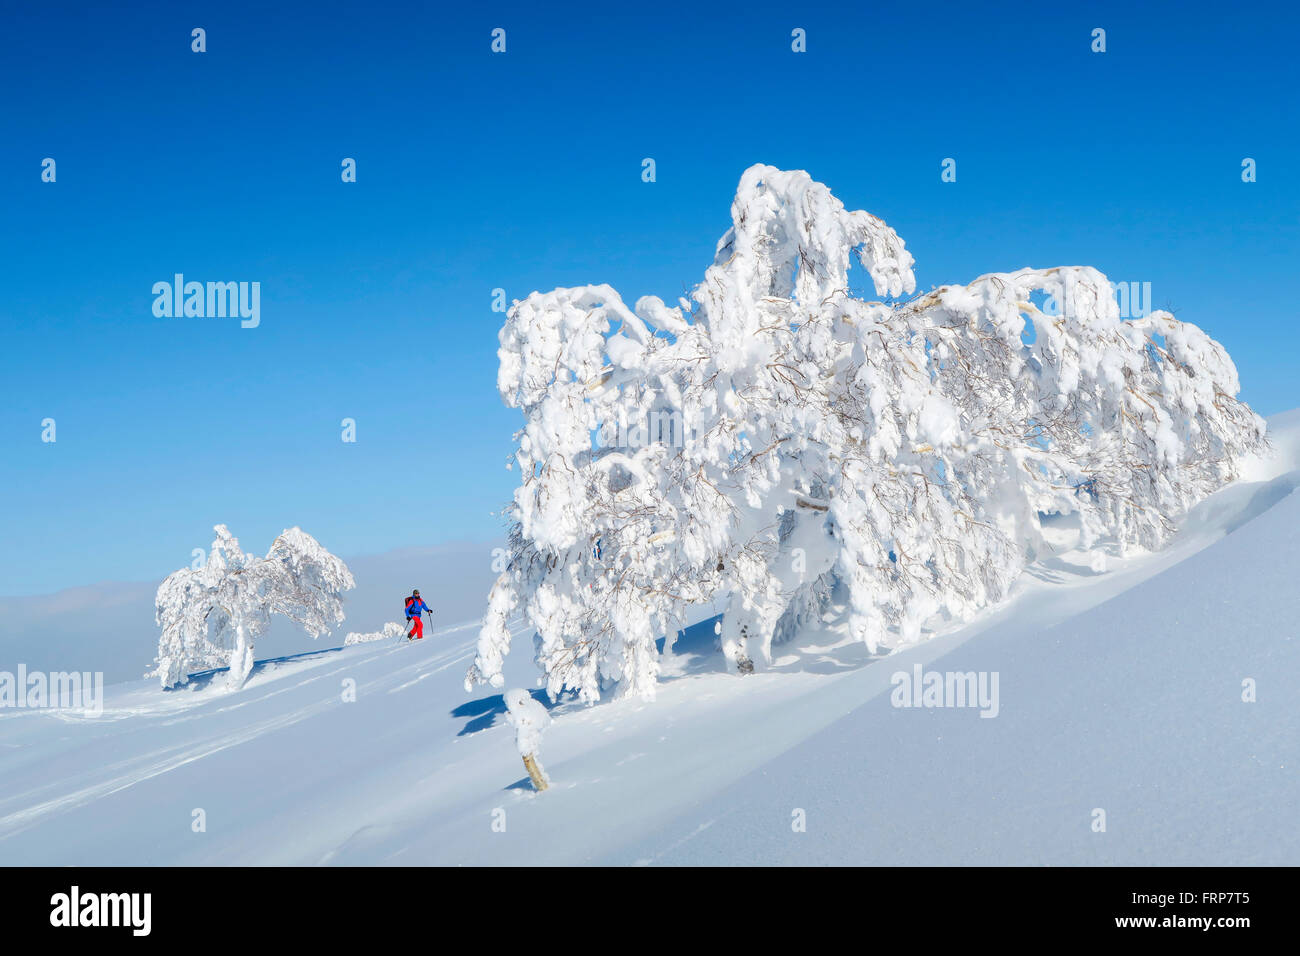 A male backcountry skier in colorful clothing is hiking through a mountain landscape with snow covered trees near the ski resort of Kiroro on Hokaido, Japan. Stock Photo